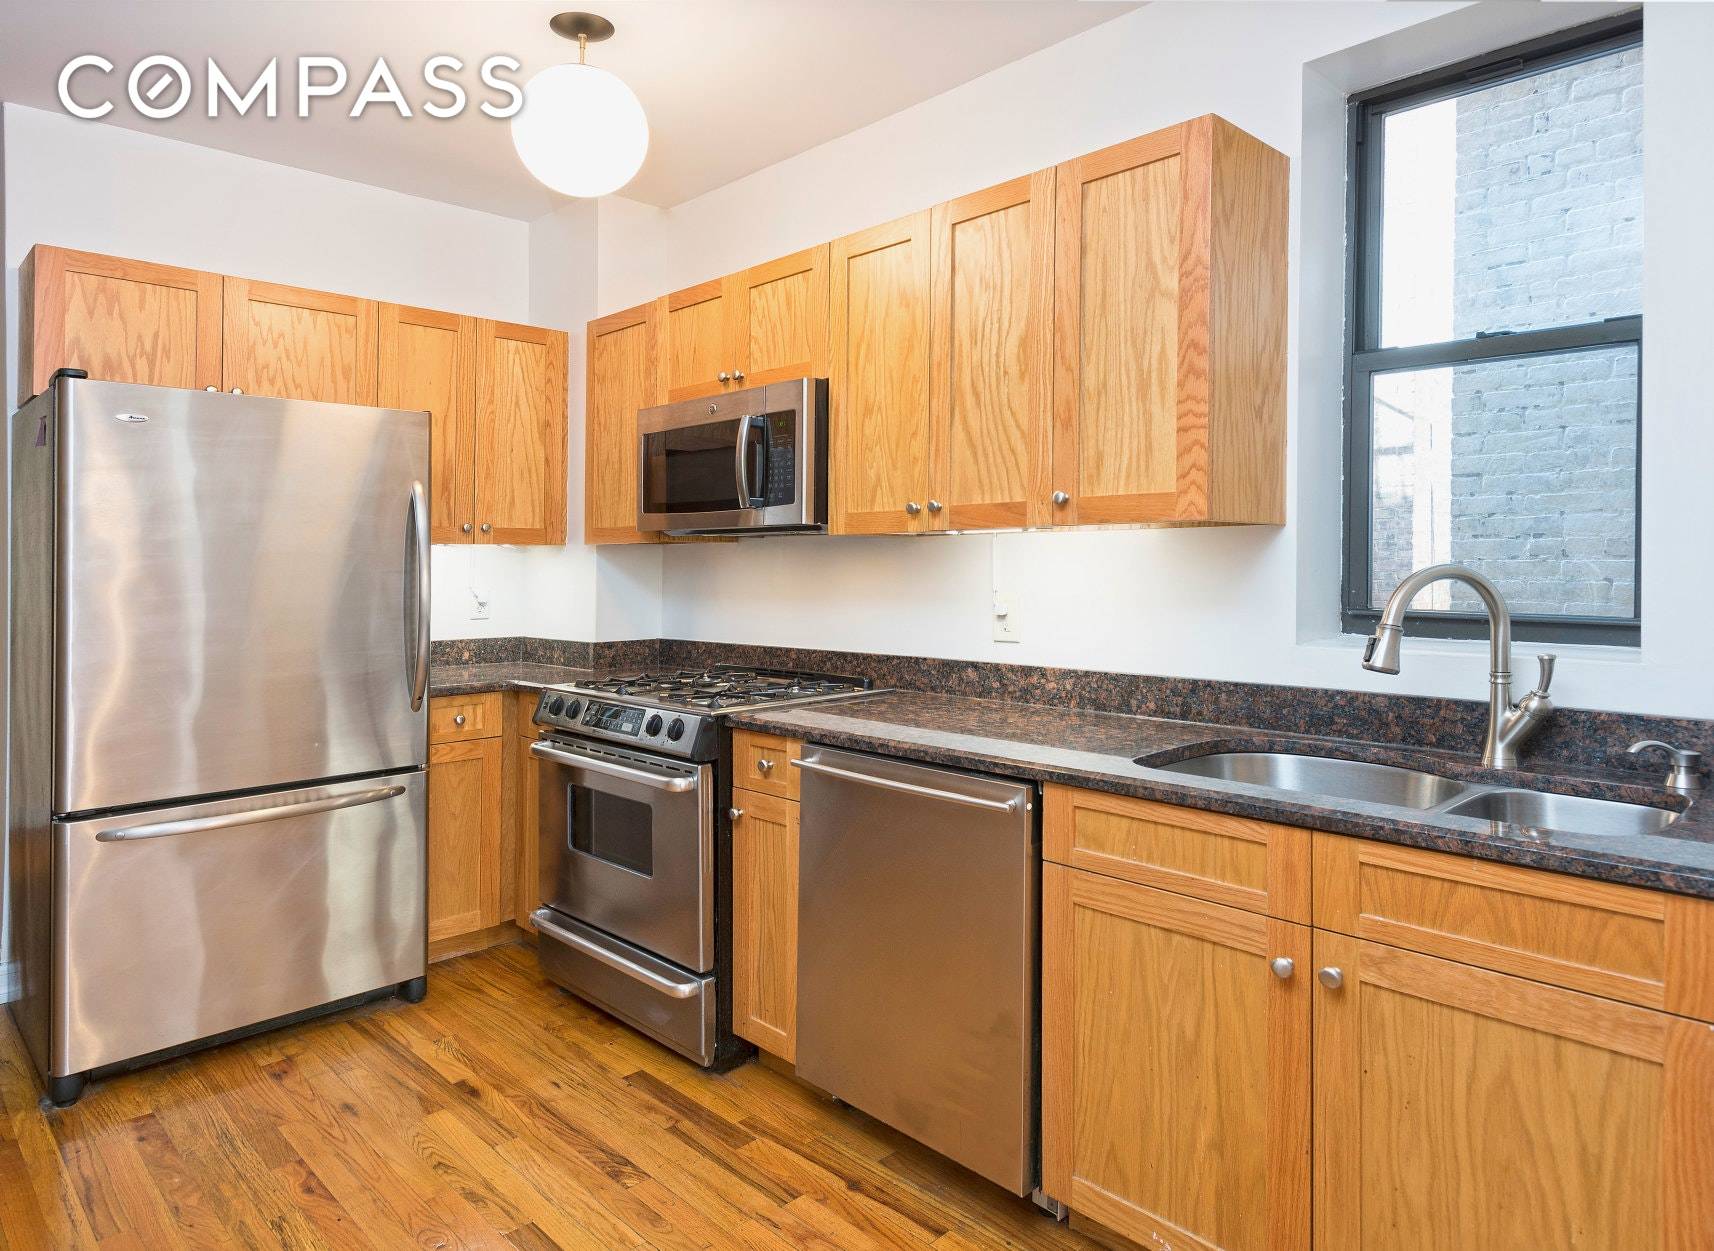 Celebrate the arrival of 158 West 119th Street, Harlem's best priced three bedroom, two bathroom home.